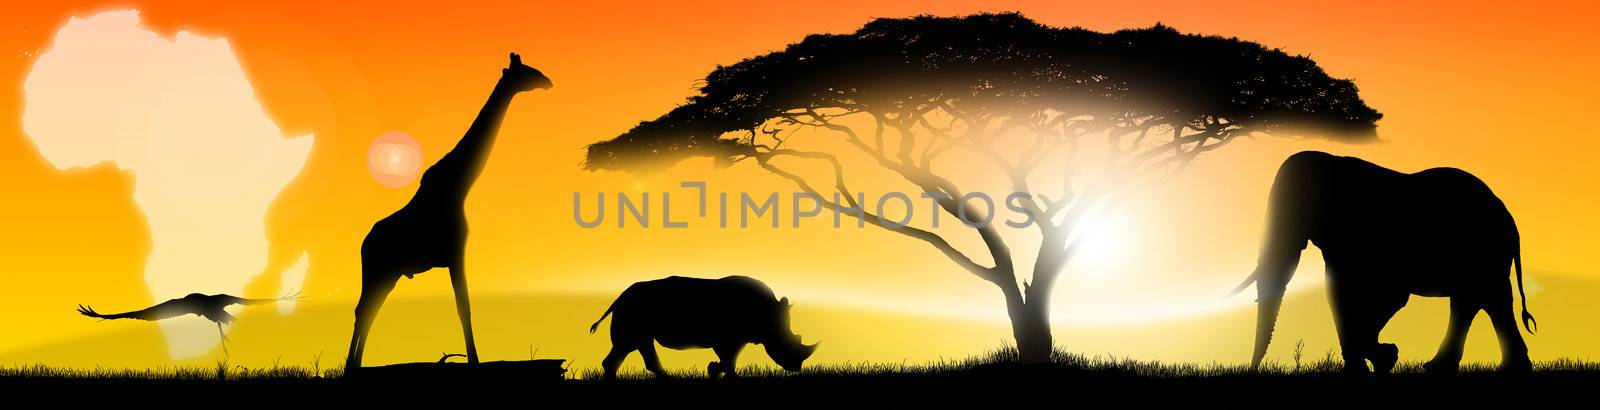 Illustration of an african landscape of fantasy, with a silhouette of a tree, elephant, rhino, giraffe and stork